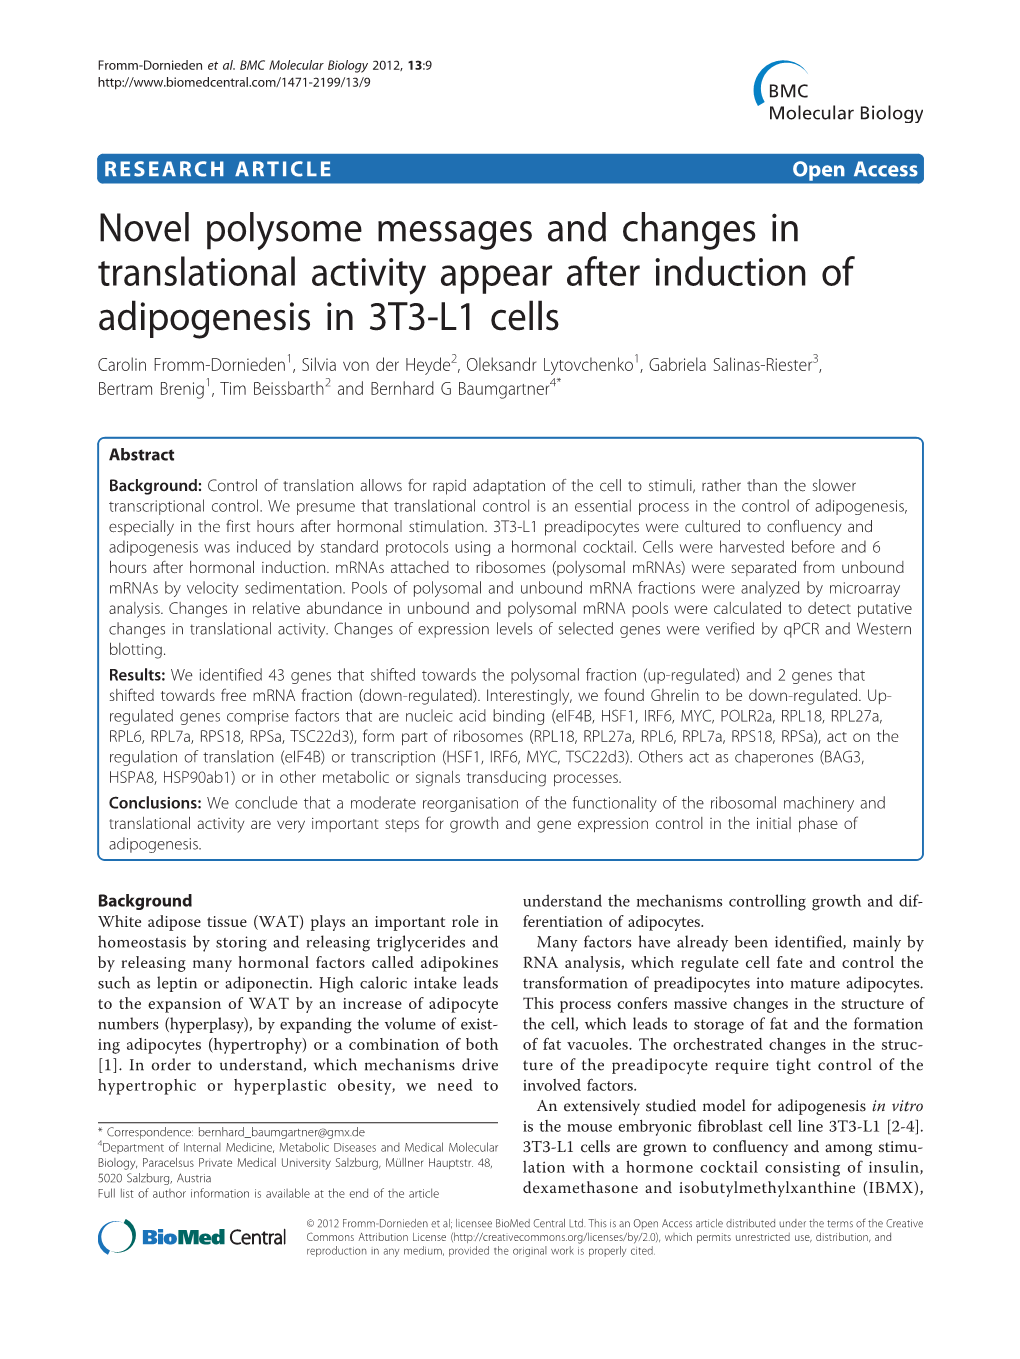 Novel Polysome Messages and Changes in Translational Activity